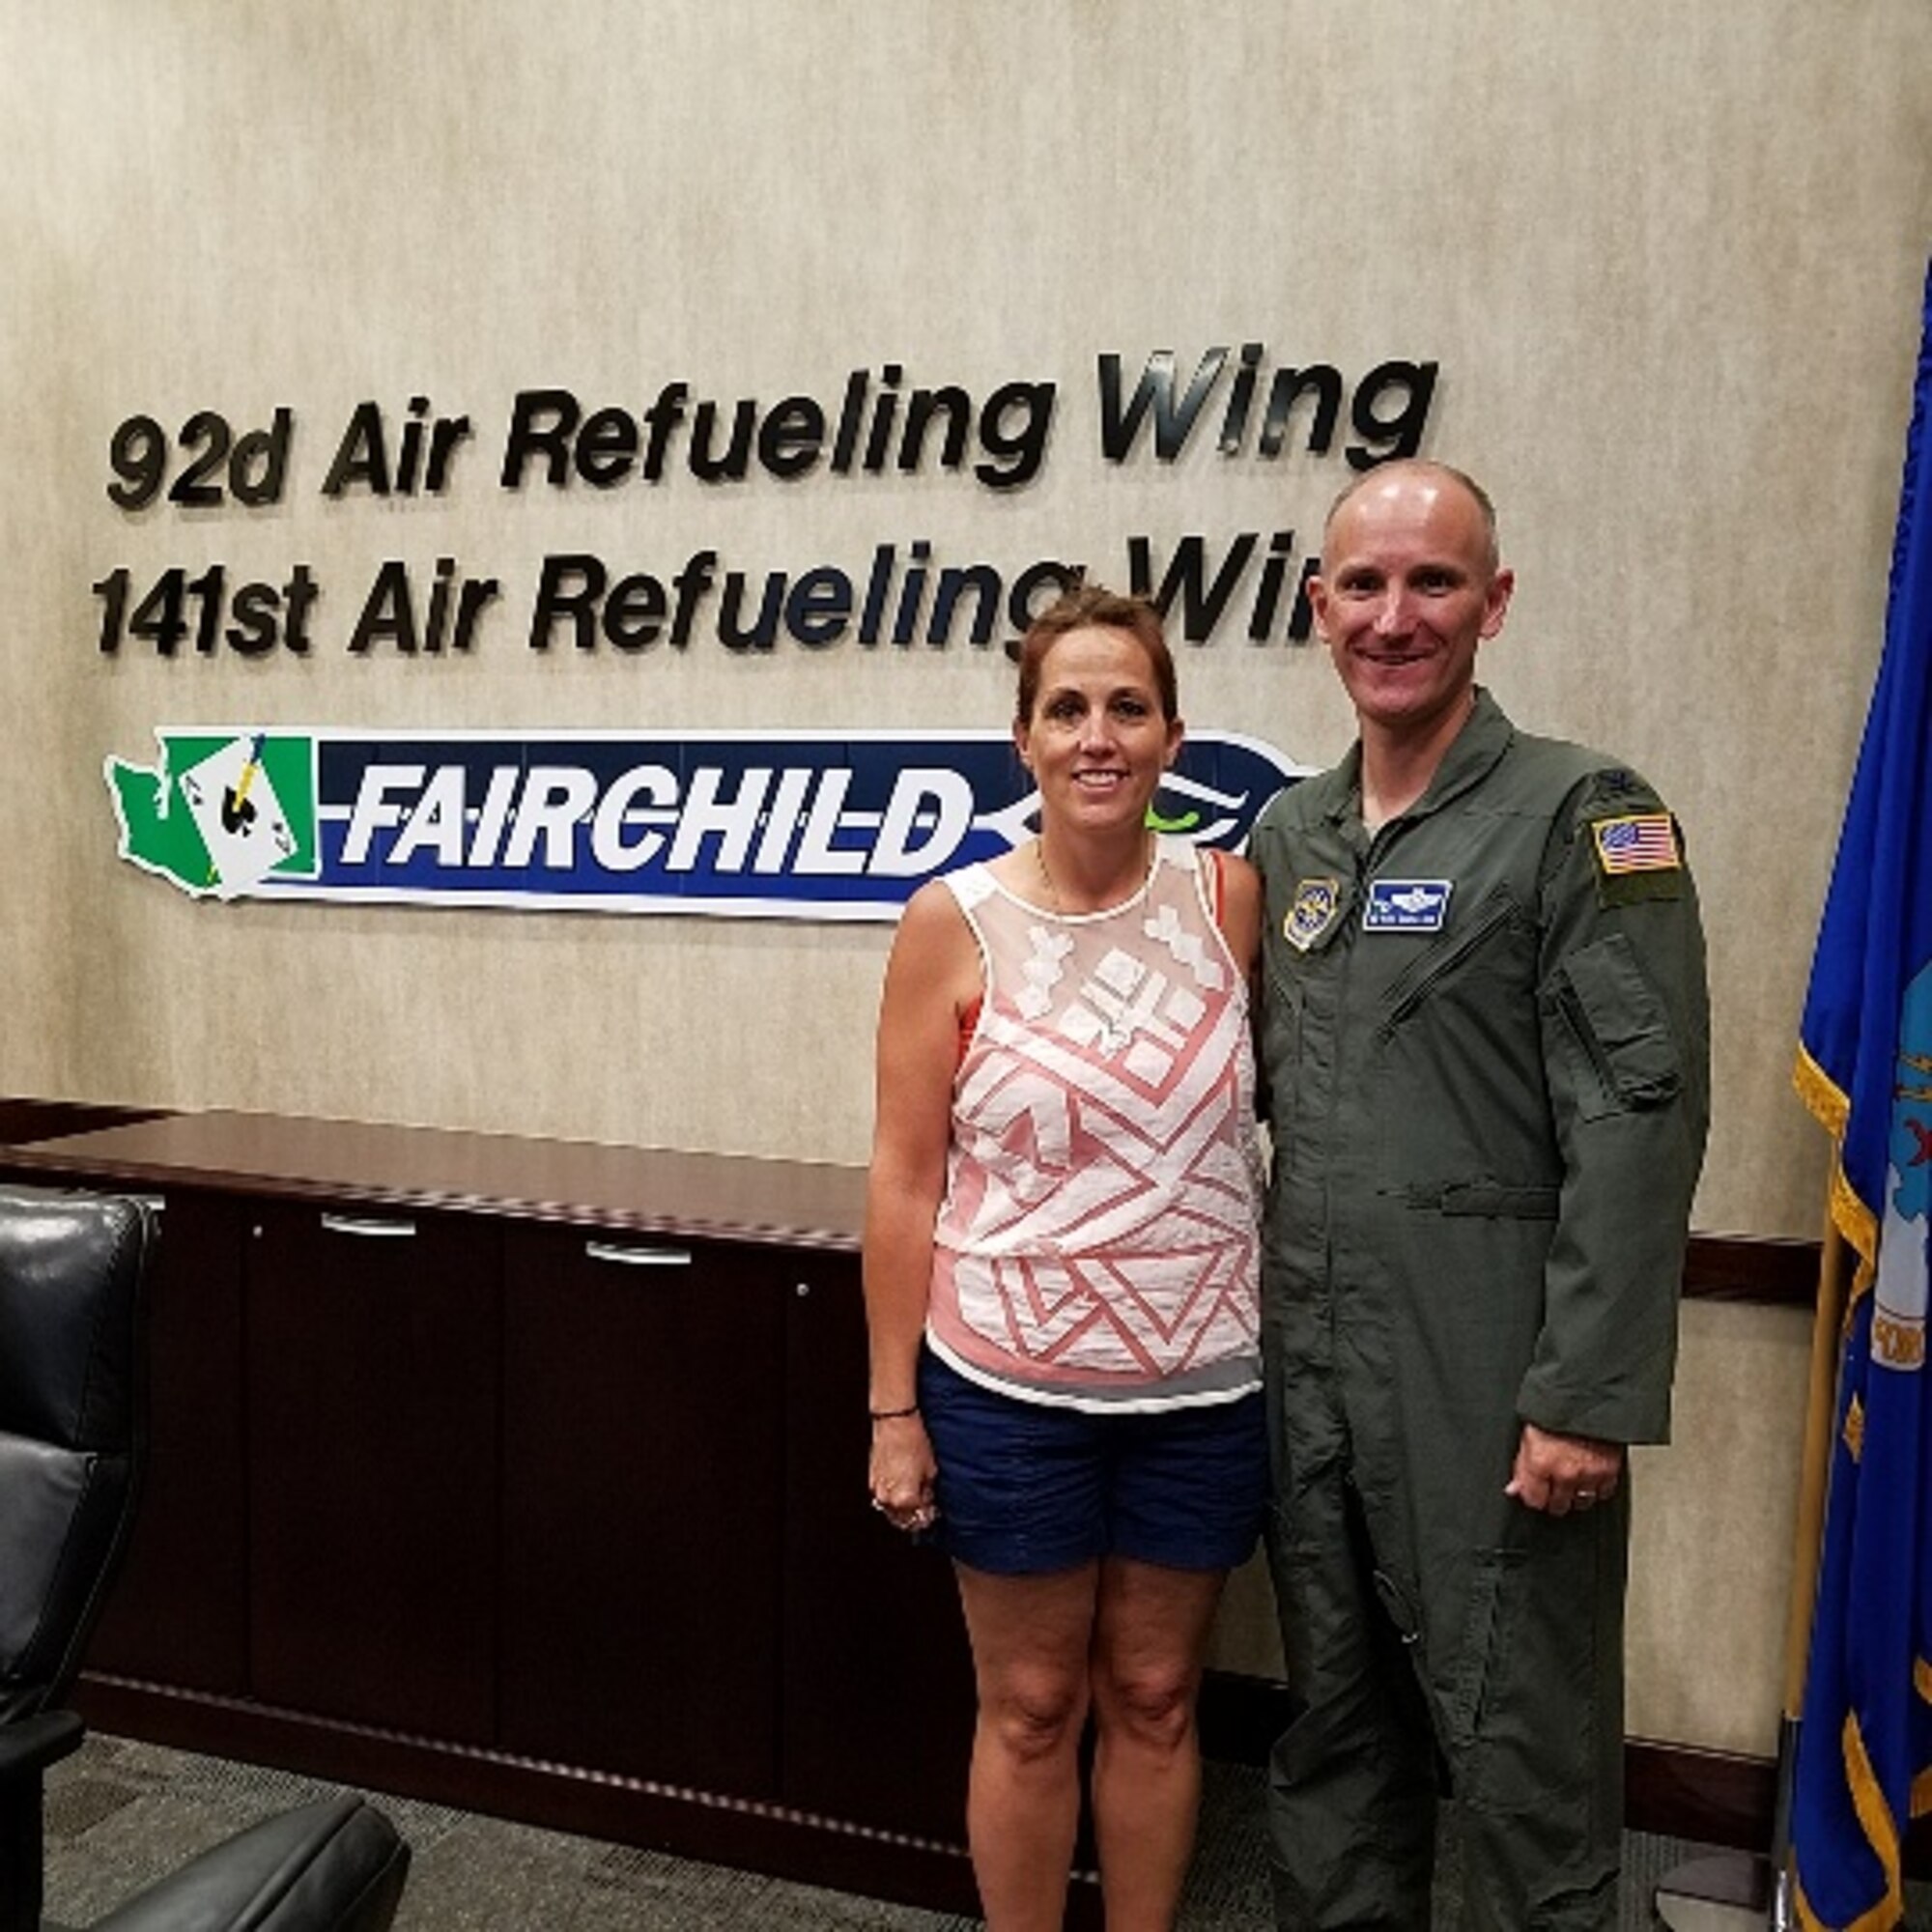 Tracy Finck, Fairchild’s first Gold Star Family member, stands with Col. Ryan Samuelson, 92nd Air Refueling Wing commander, Aug. 3, 2017 at Fairchild Air Force Base, Washington. The GSF program is for family members of Airmen who were killed in action during international terrorist attacks against the U.S., in a friendly foreign nation, or during military operations while serving outside the U.S. (Courtesy Photo)